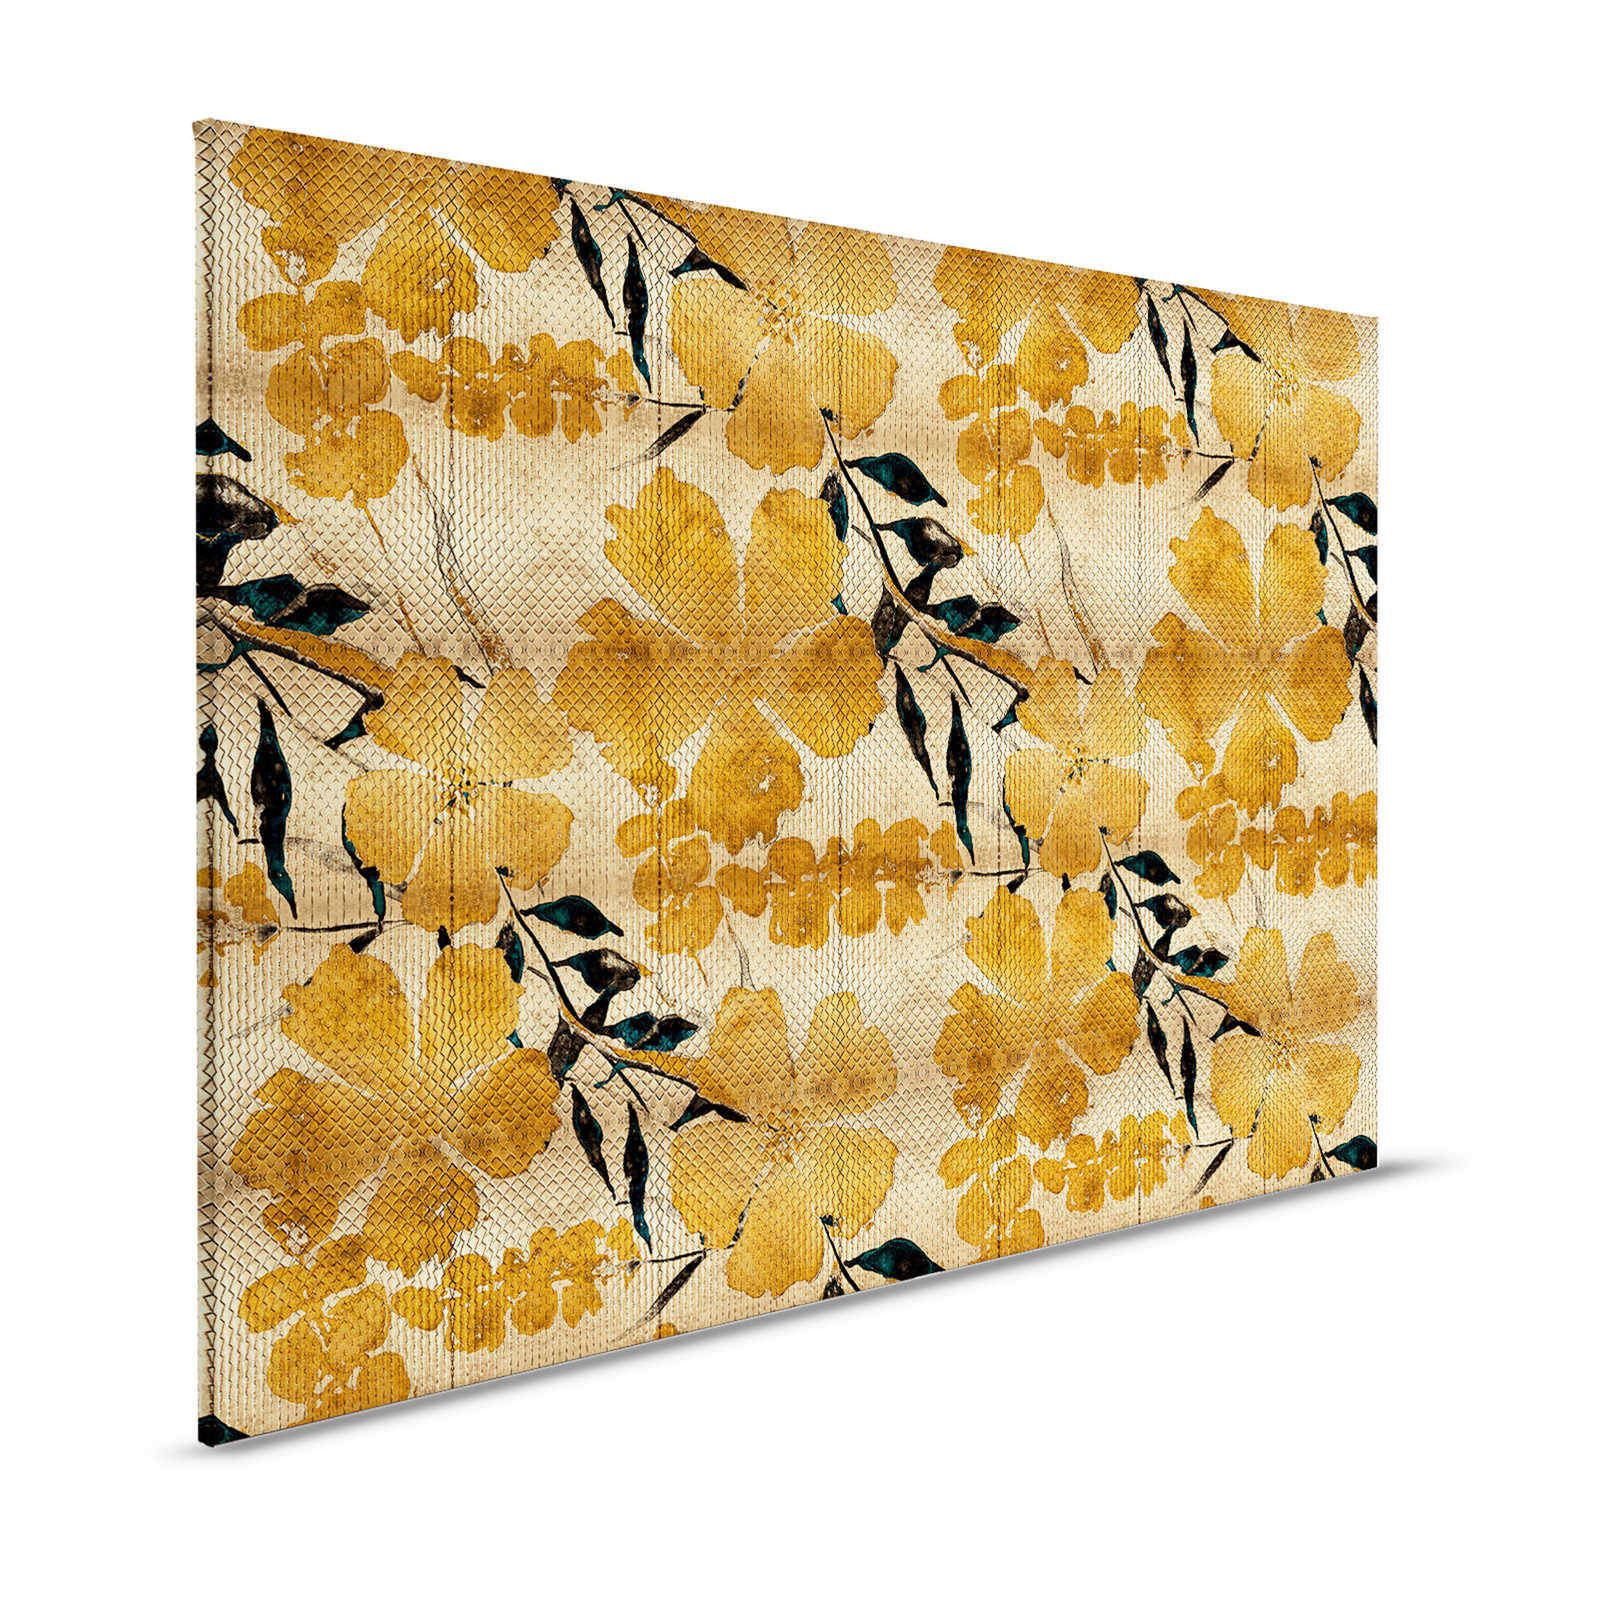 Odessa 1 - Metallic Canvas Painting with Cherry Blossom Pattern in Gold - 1.20 m x 0.80 m
